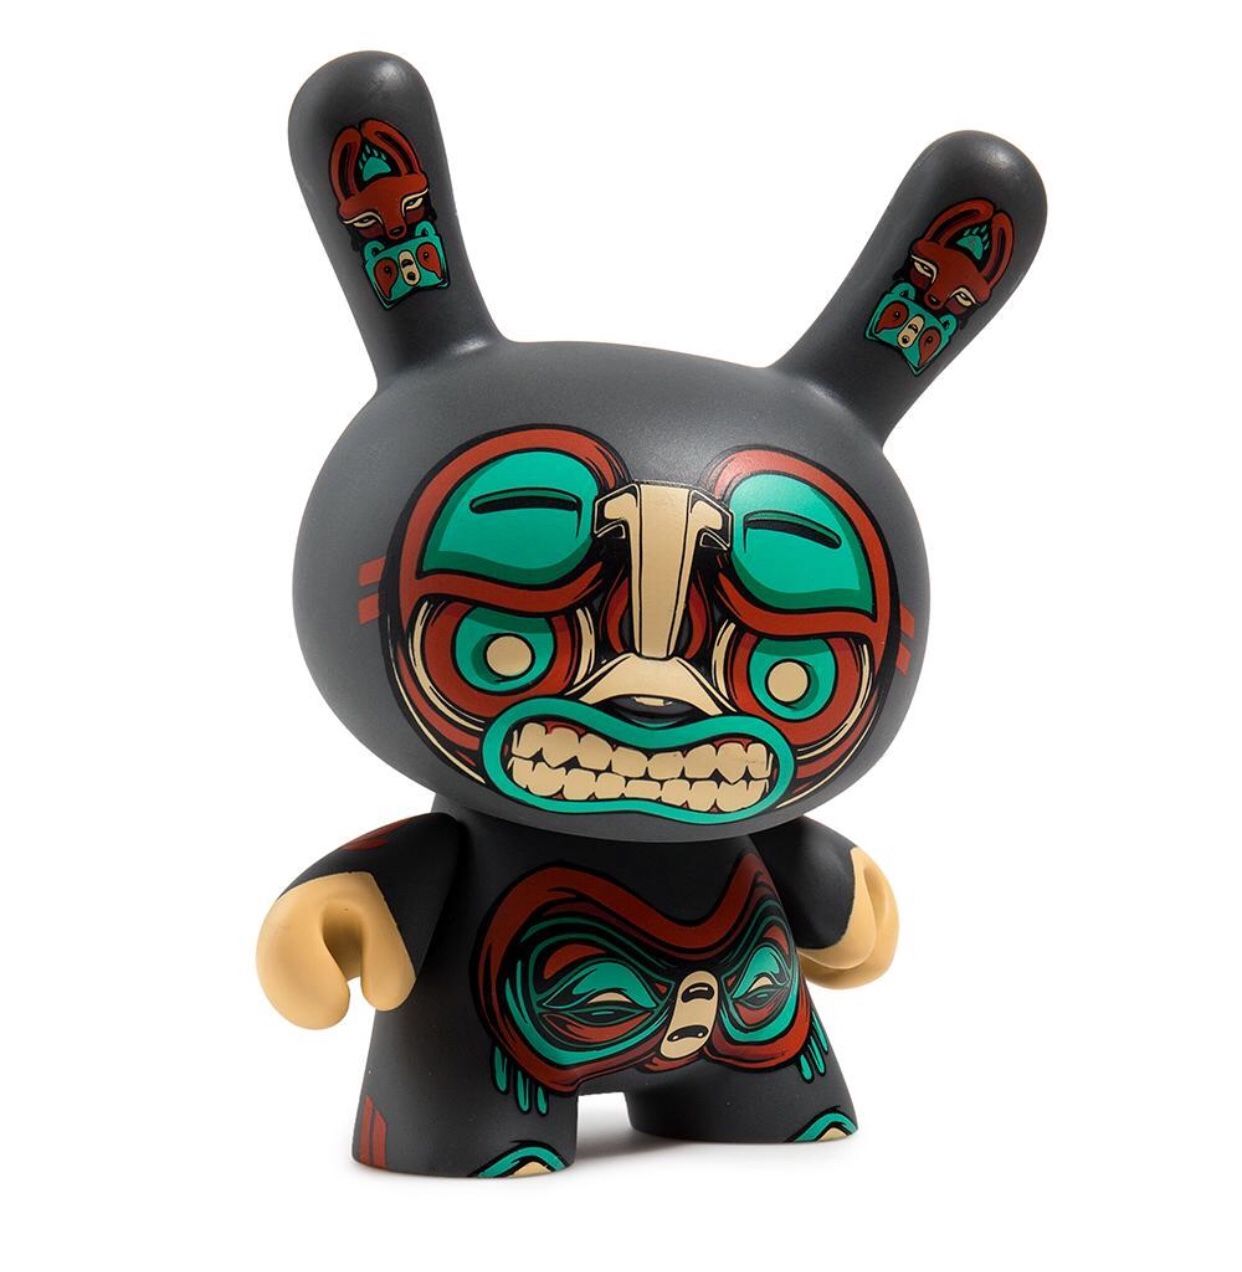 Kuba 5" Dunny Vinyl Figure (Only 1200 made) by Mike Fudge x Kidrobot New!! Gray